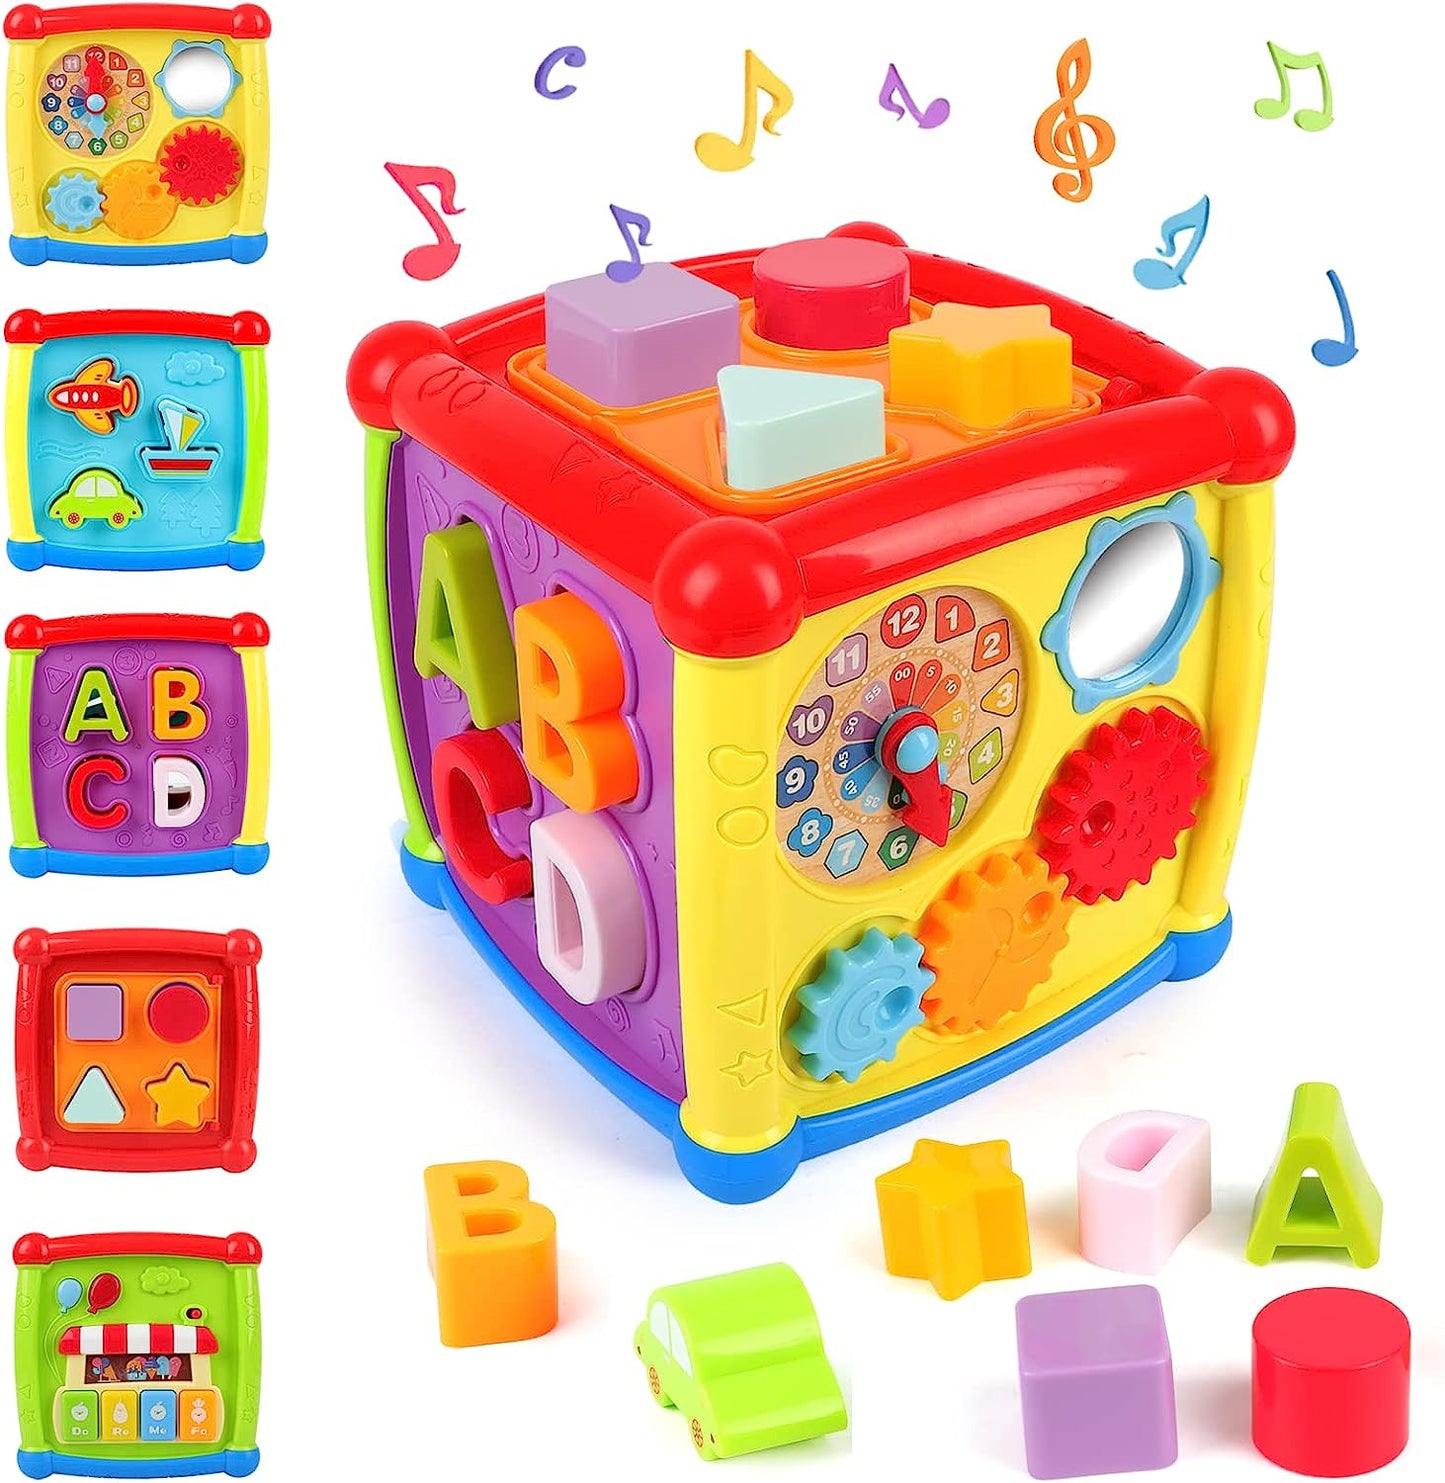 2023 Baby Toy, Baby Musical Toy, Baby Cube, Early Learning Toy 18 Months, Sound and Light, Activity and Developmental Toys, Educational Games Gift for Boys Girls 1 2 Years Old